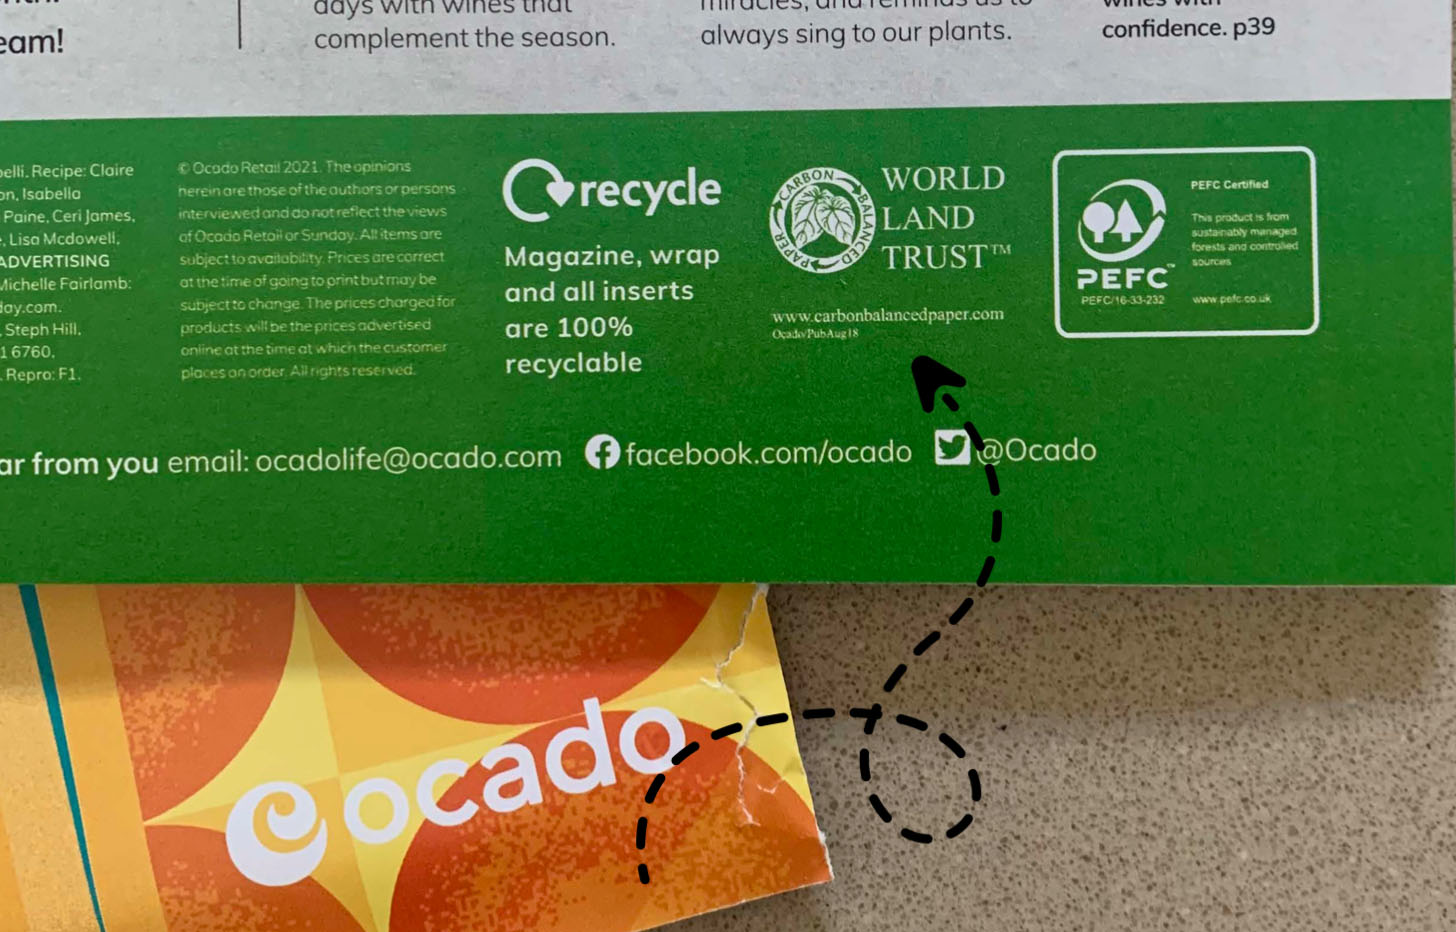 A section of a product's packaging with World Land Trust and PEFC certification stamps next to a blurb stating that the packaging is 100% recyclable.